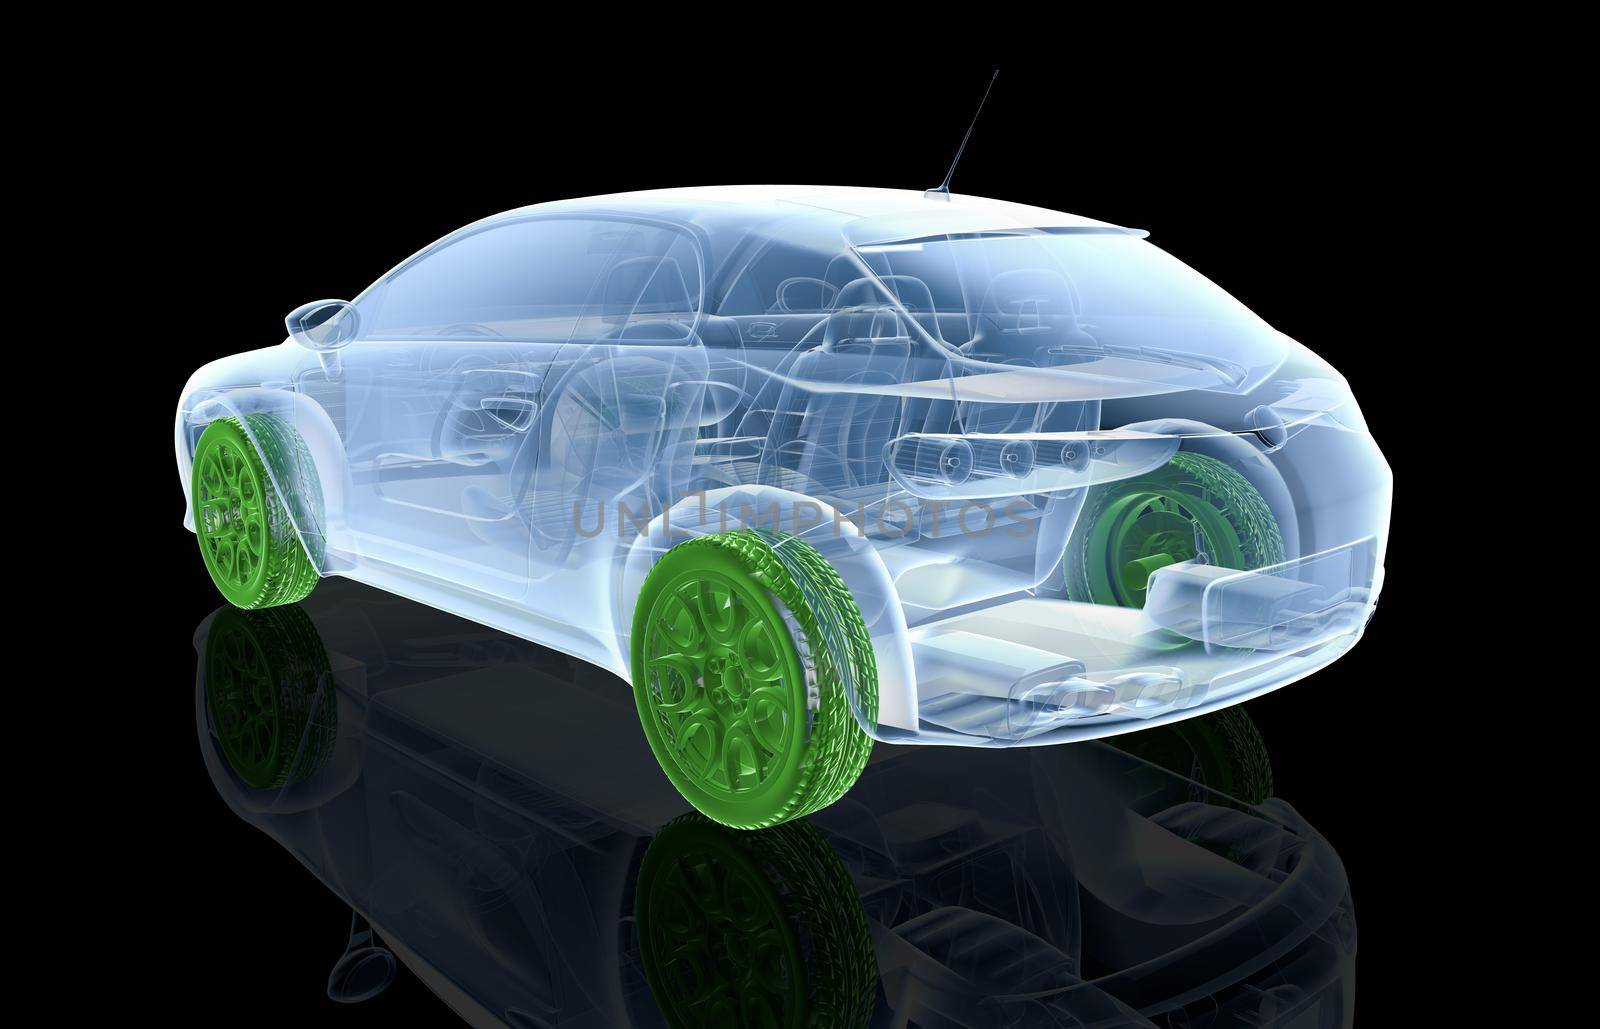 X-ray car with green wheels on a black background - 3D illustration